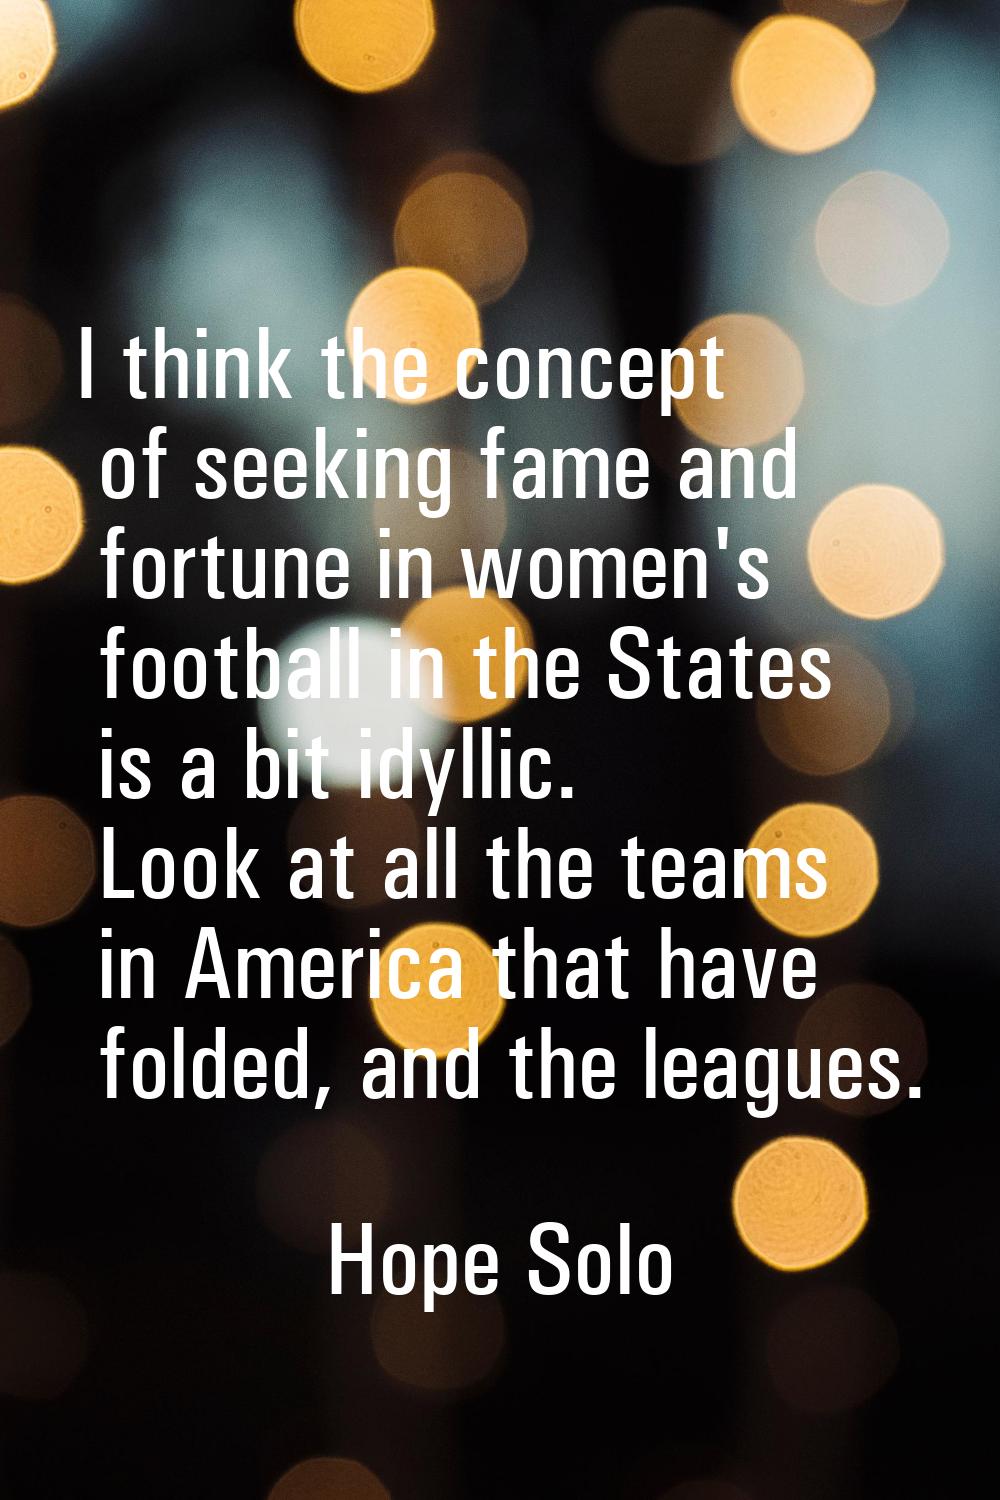 I think the concept of seeking fame and fortune in women's football in the States is a bit idyllic.